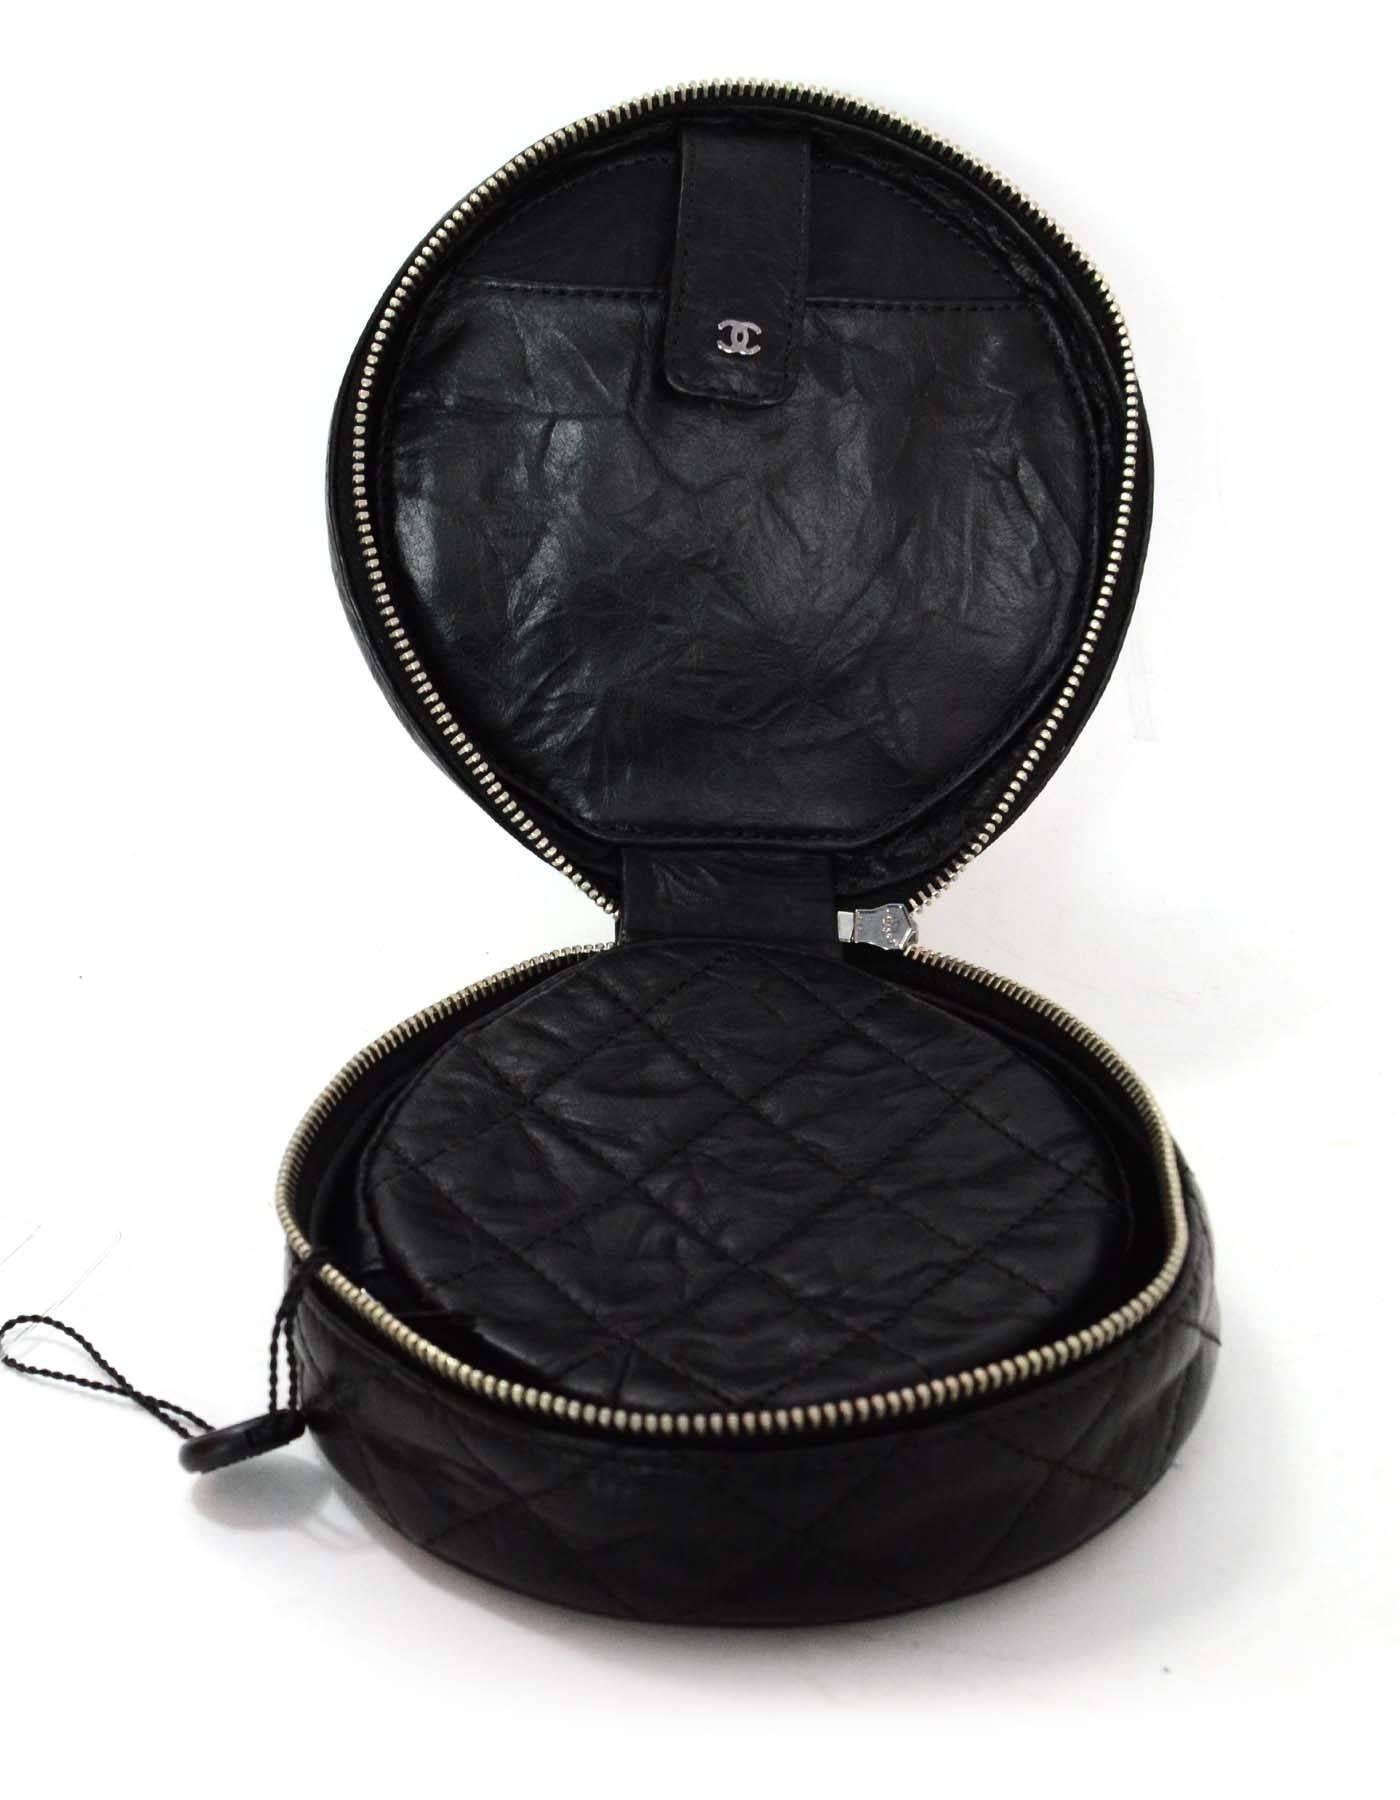 Women's Chanel Black Distressed Leather Jewelry Case